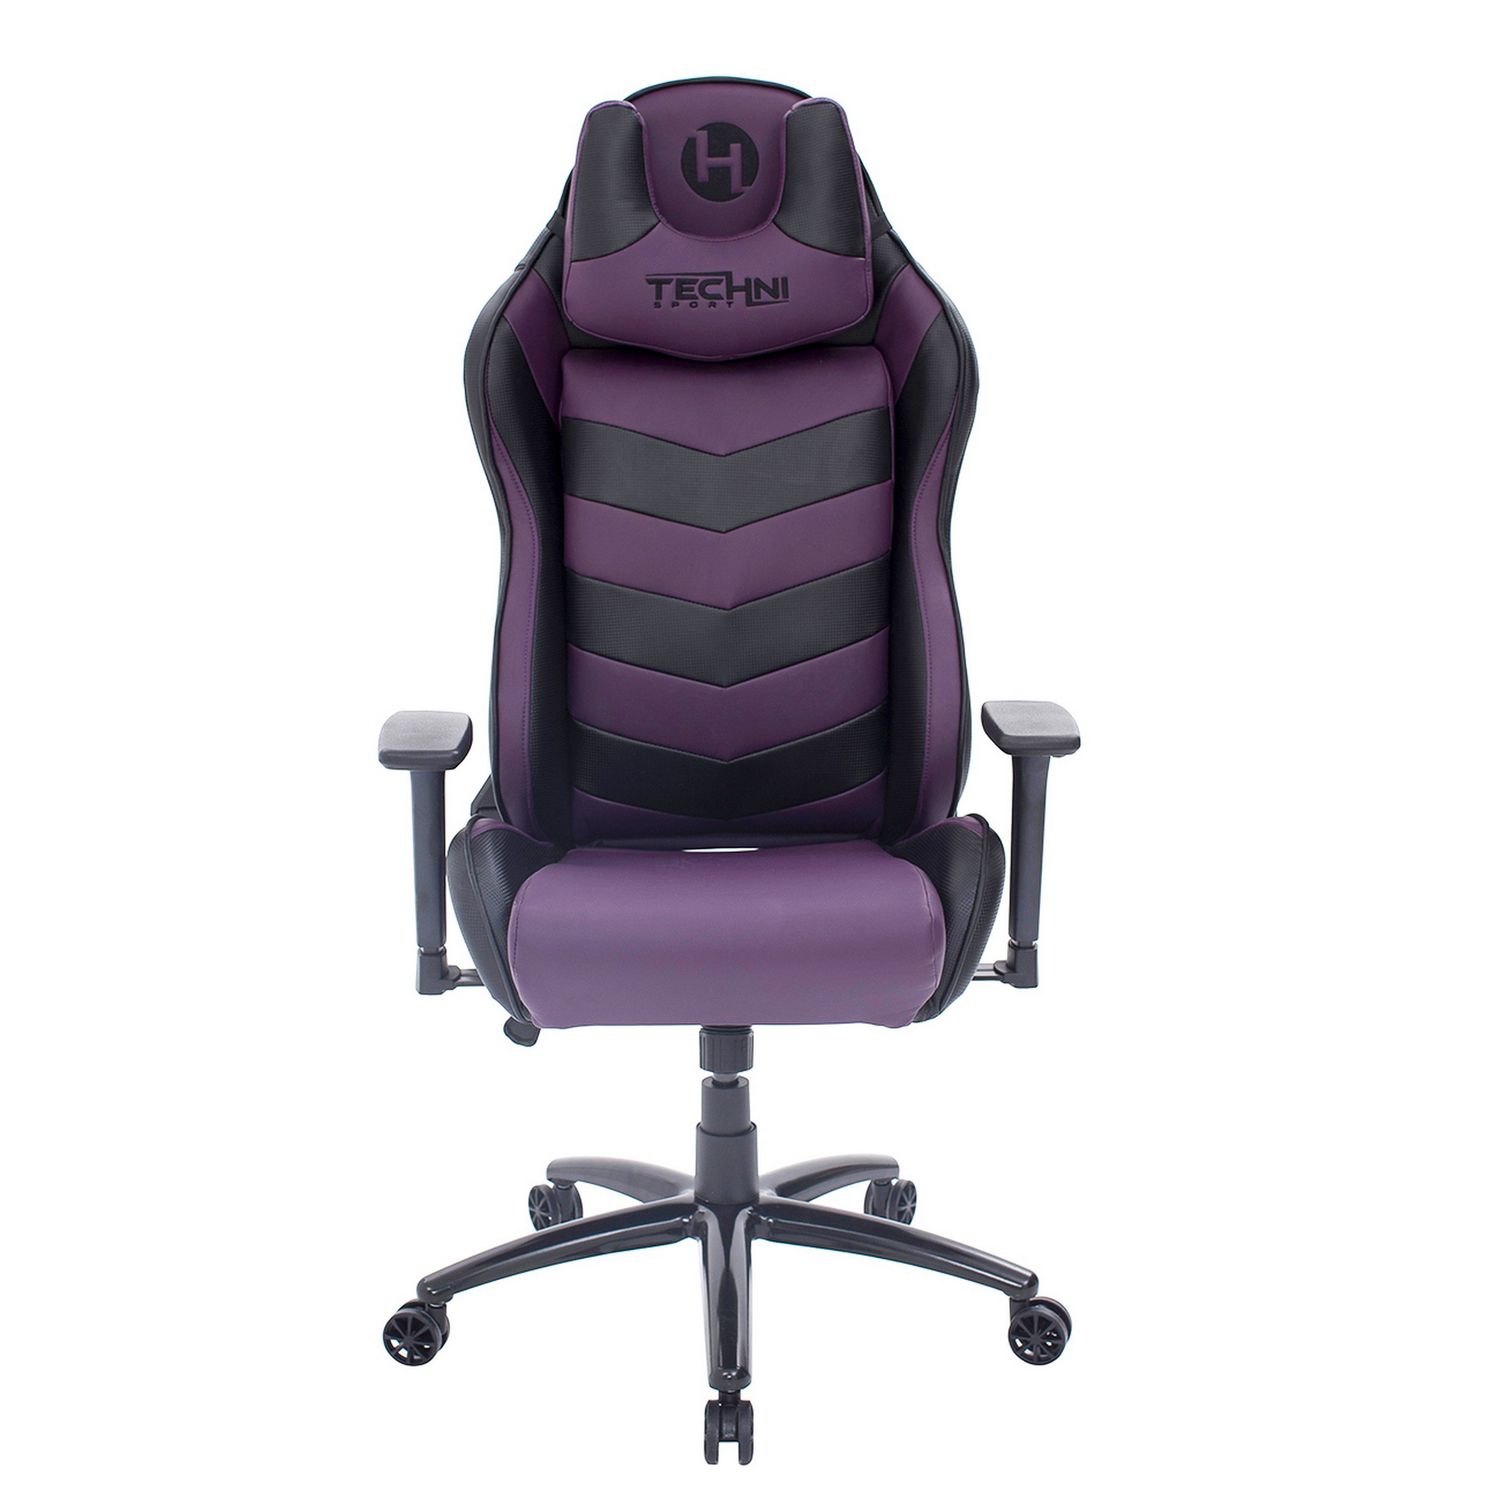 Video Game Chairs Computer Gaming Chairs Rocker Gaming Chairs Kohls